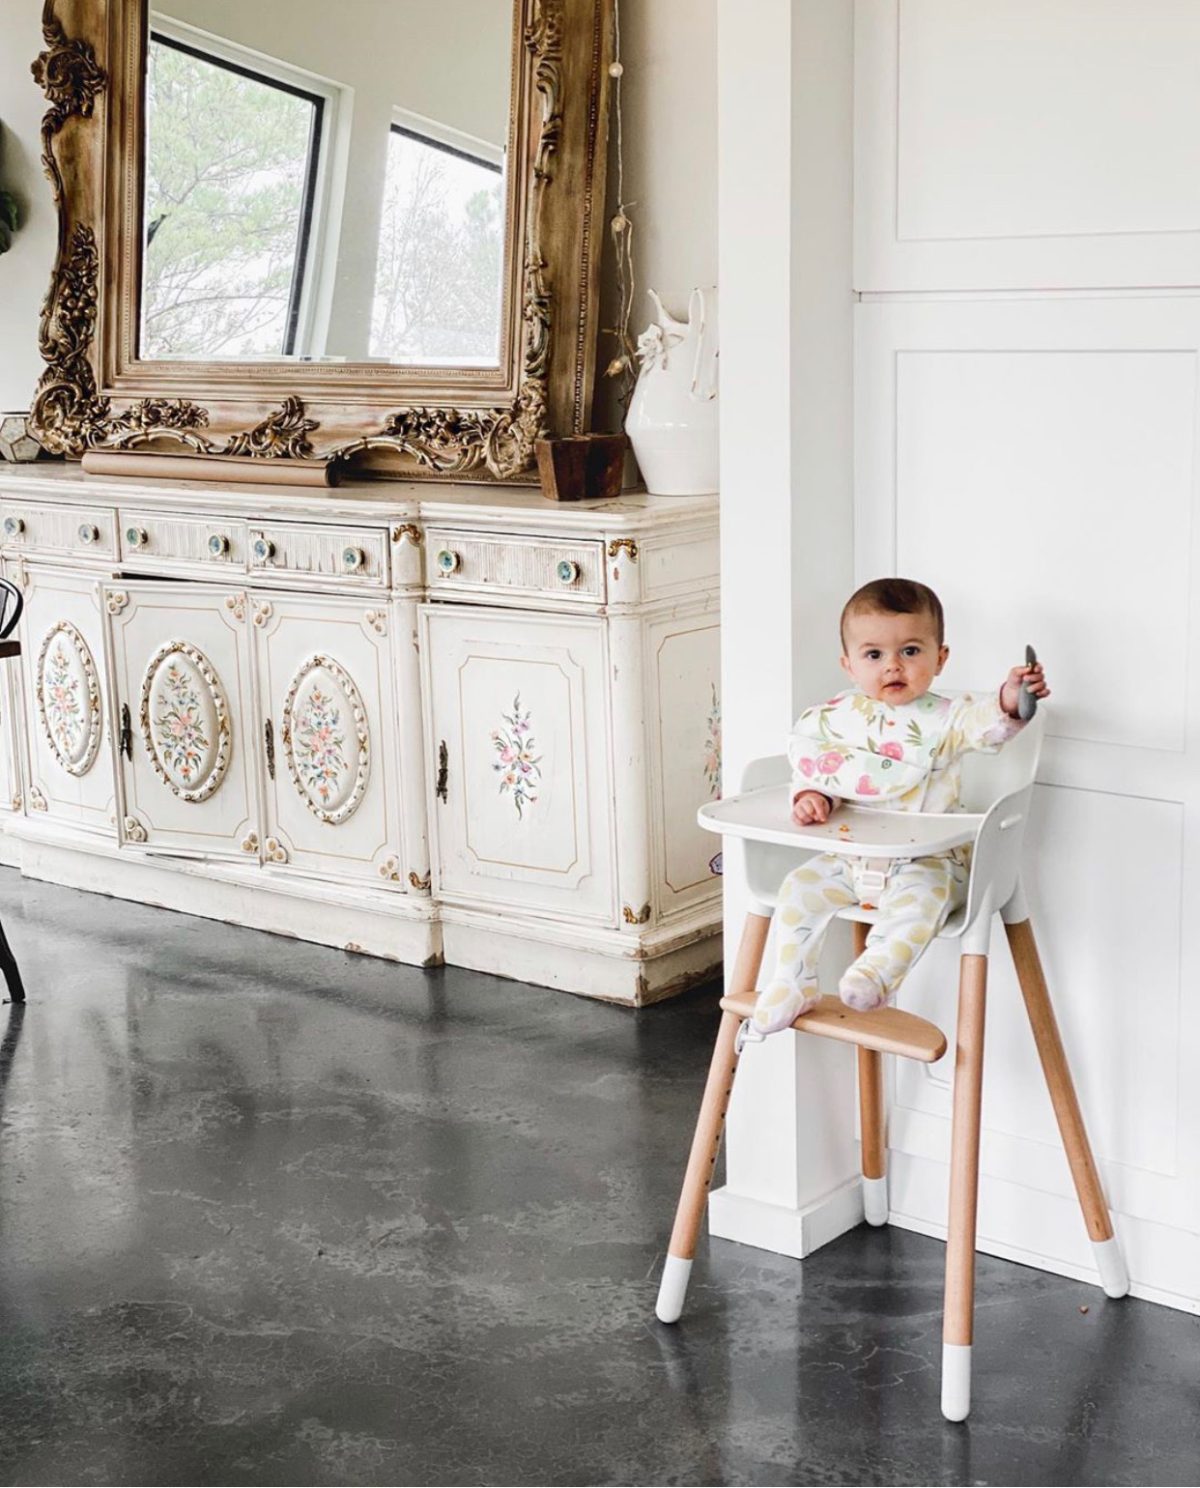 azure farm baby girl in high chair concrete floors white cabinets 